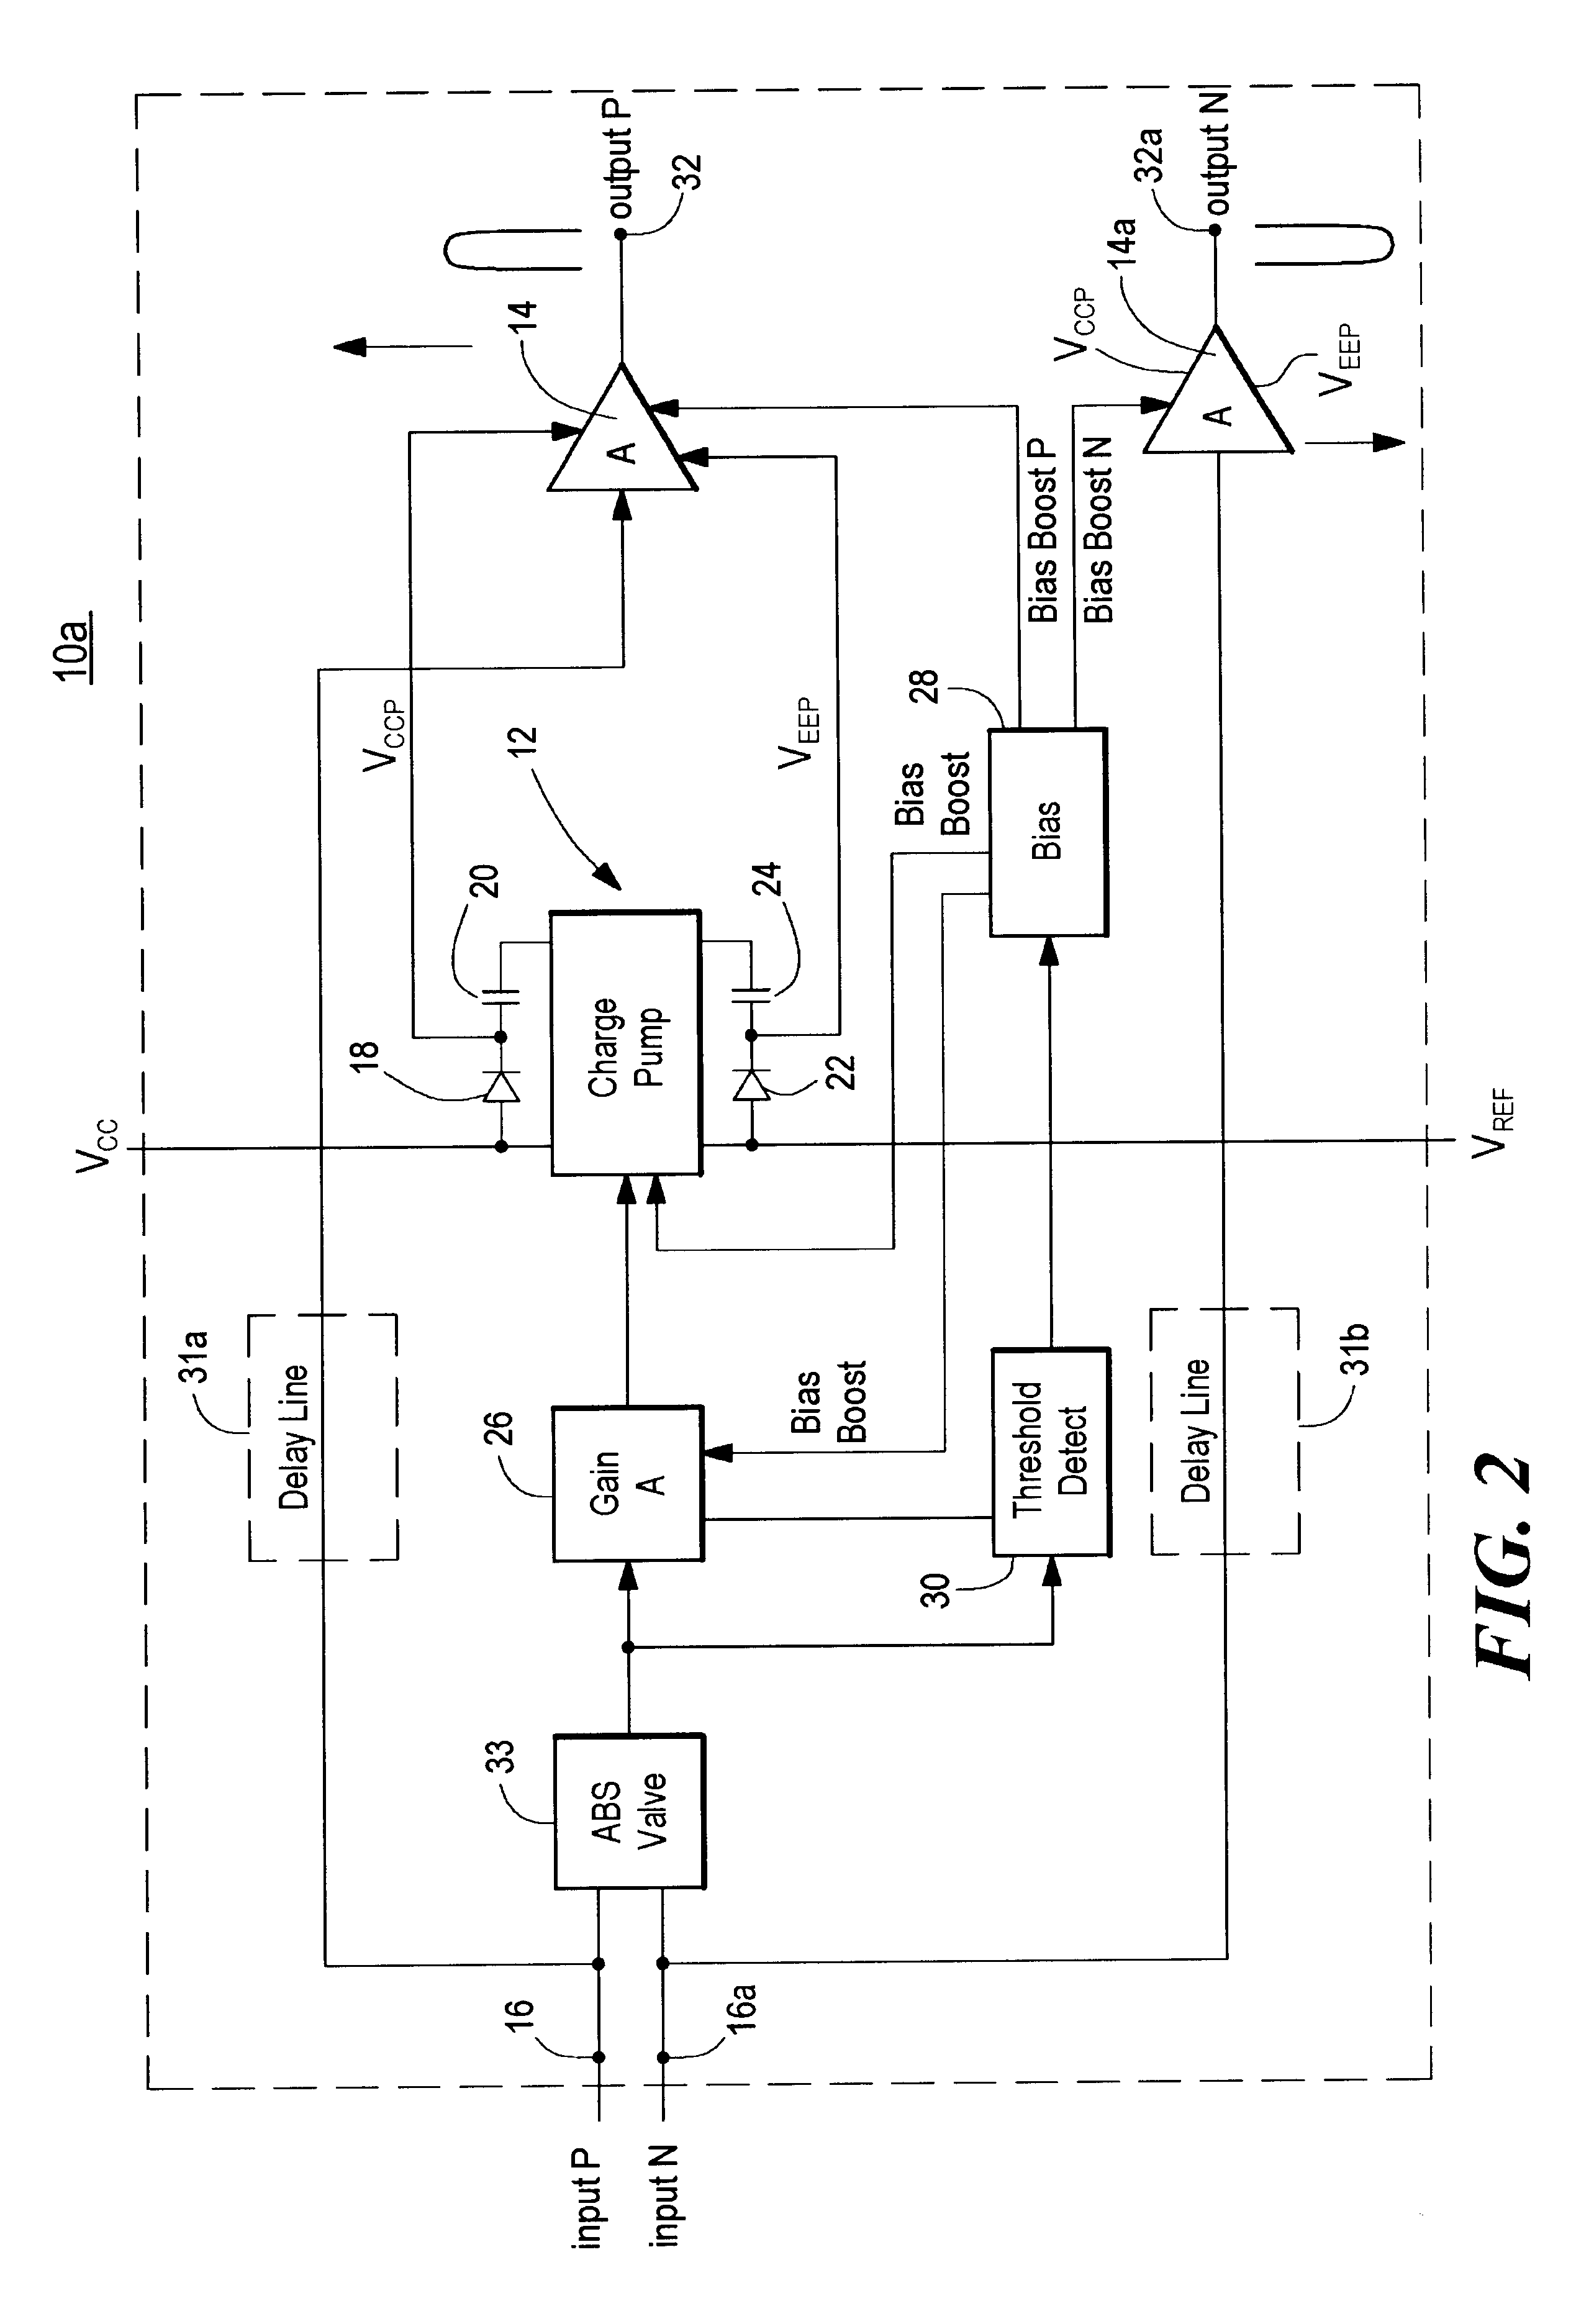 Amplifier system with on-demand power supply boost